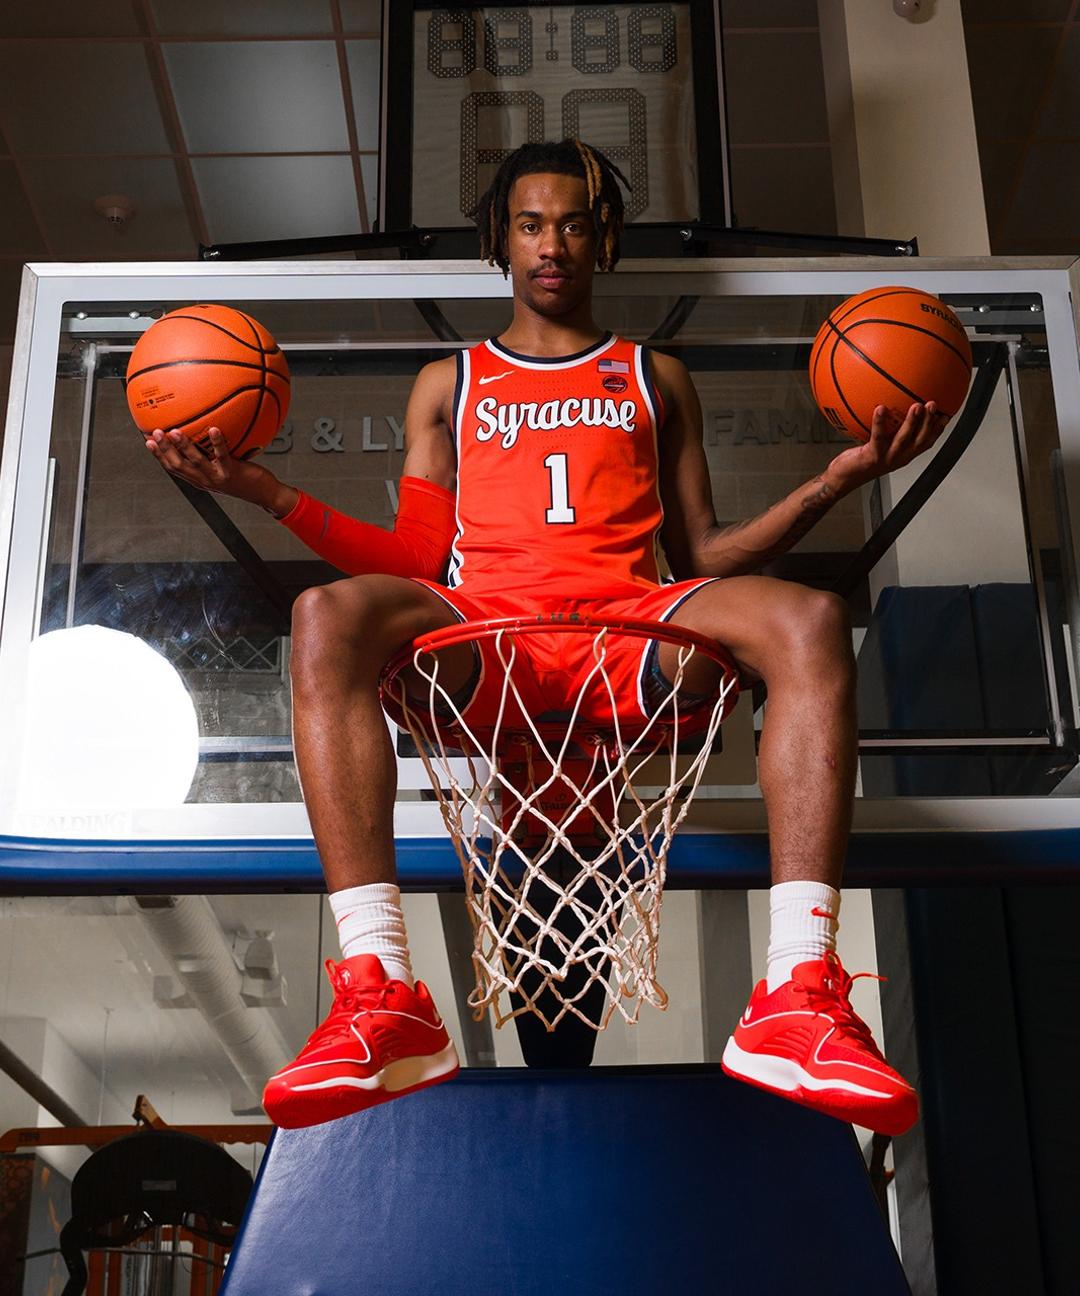 Image related to Orange Add Taylor To Hoop Roster